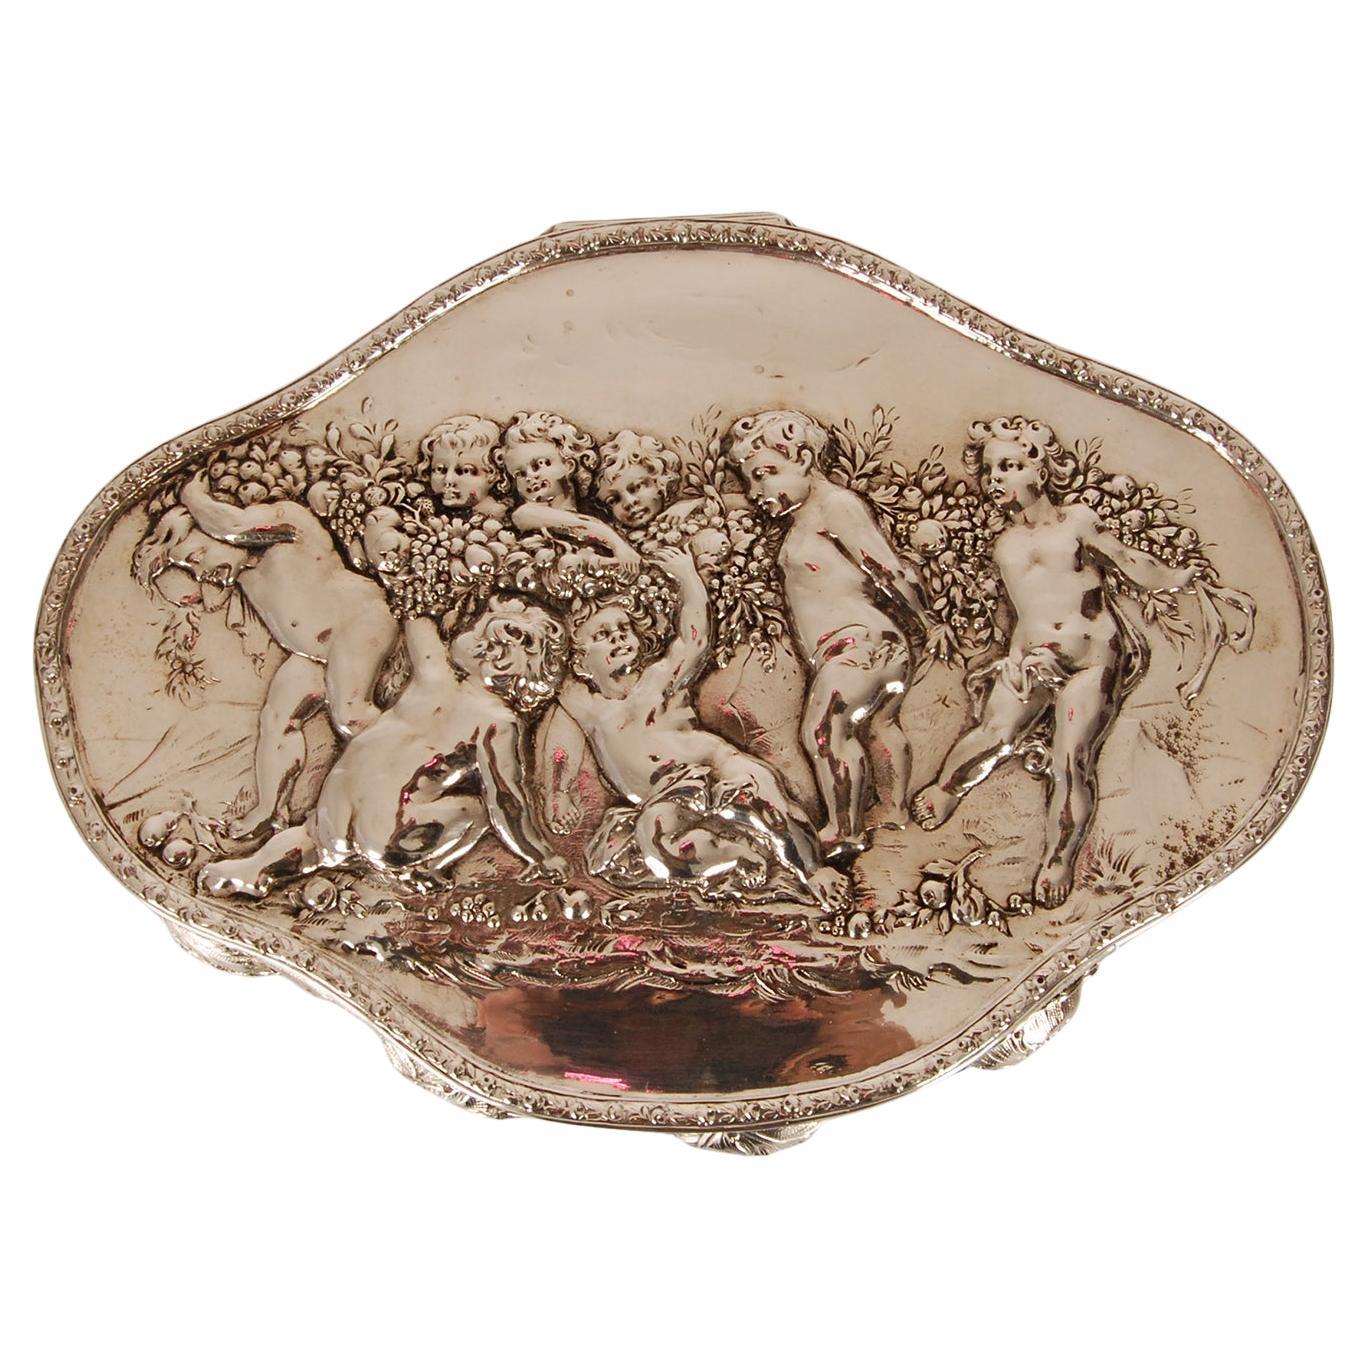 Hanau Silver Jewelry Box J.D.Schleissner and Sons Antique German Casket Putto For Sale